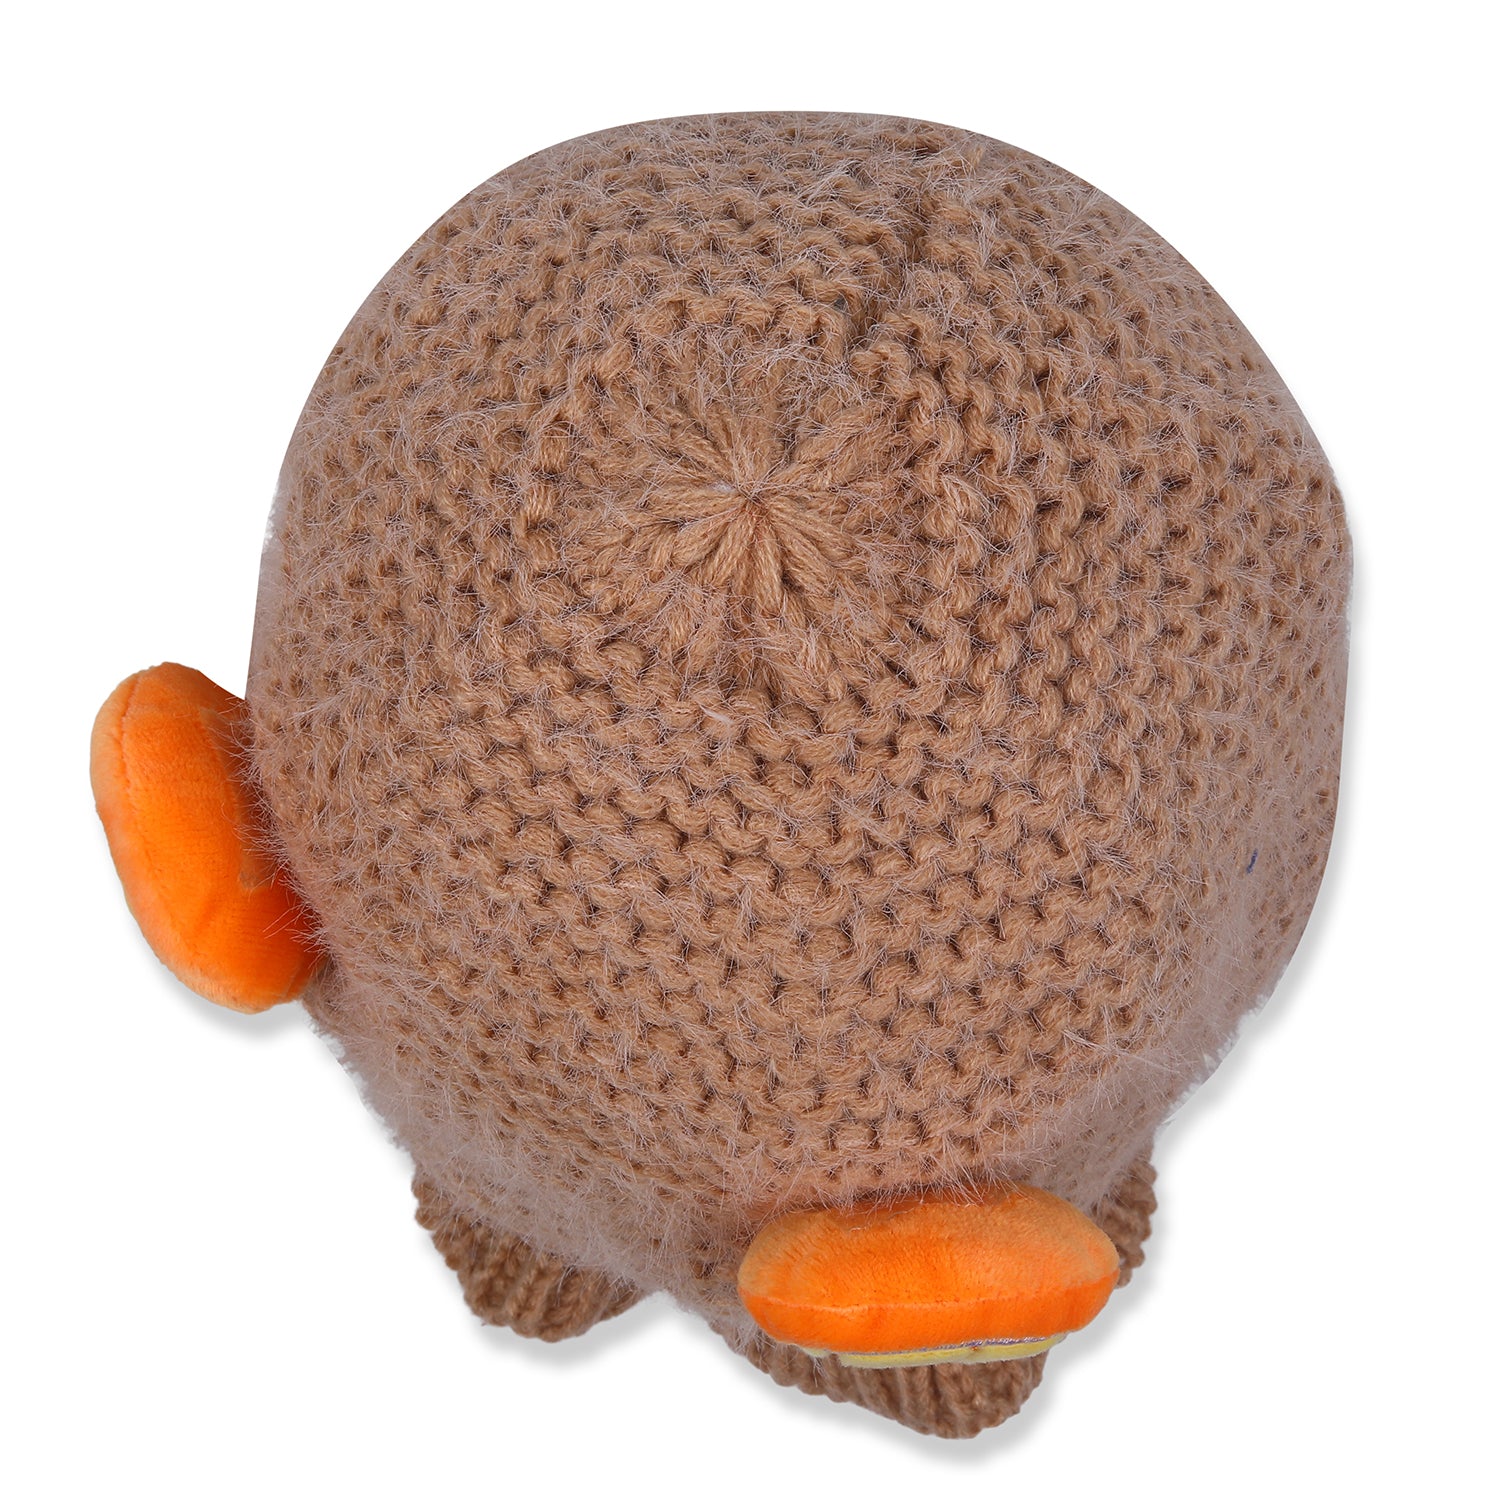 Baby Moo 3D Orange Ear With Tie Knot For Ear Cover Knitted Woolen Cap - Brown - Baby Moo